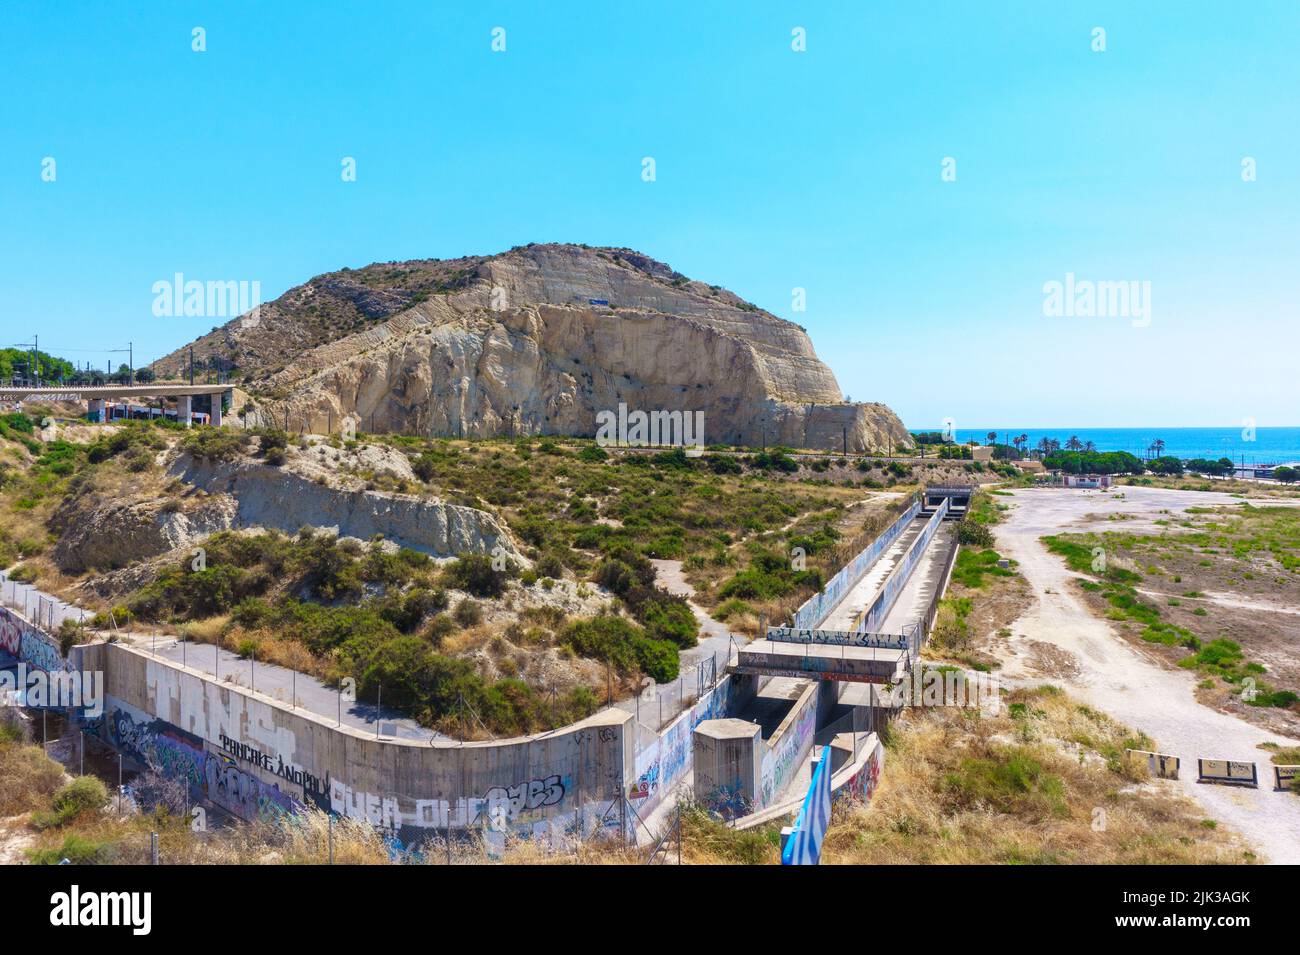 Alicante, Spain - July 10, 2022: Aerial view of the quarry in the suburbs of the city. Stock Photo